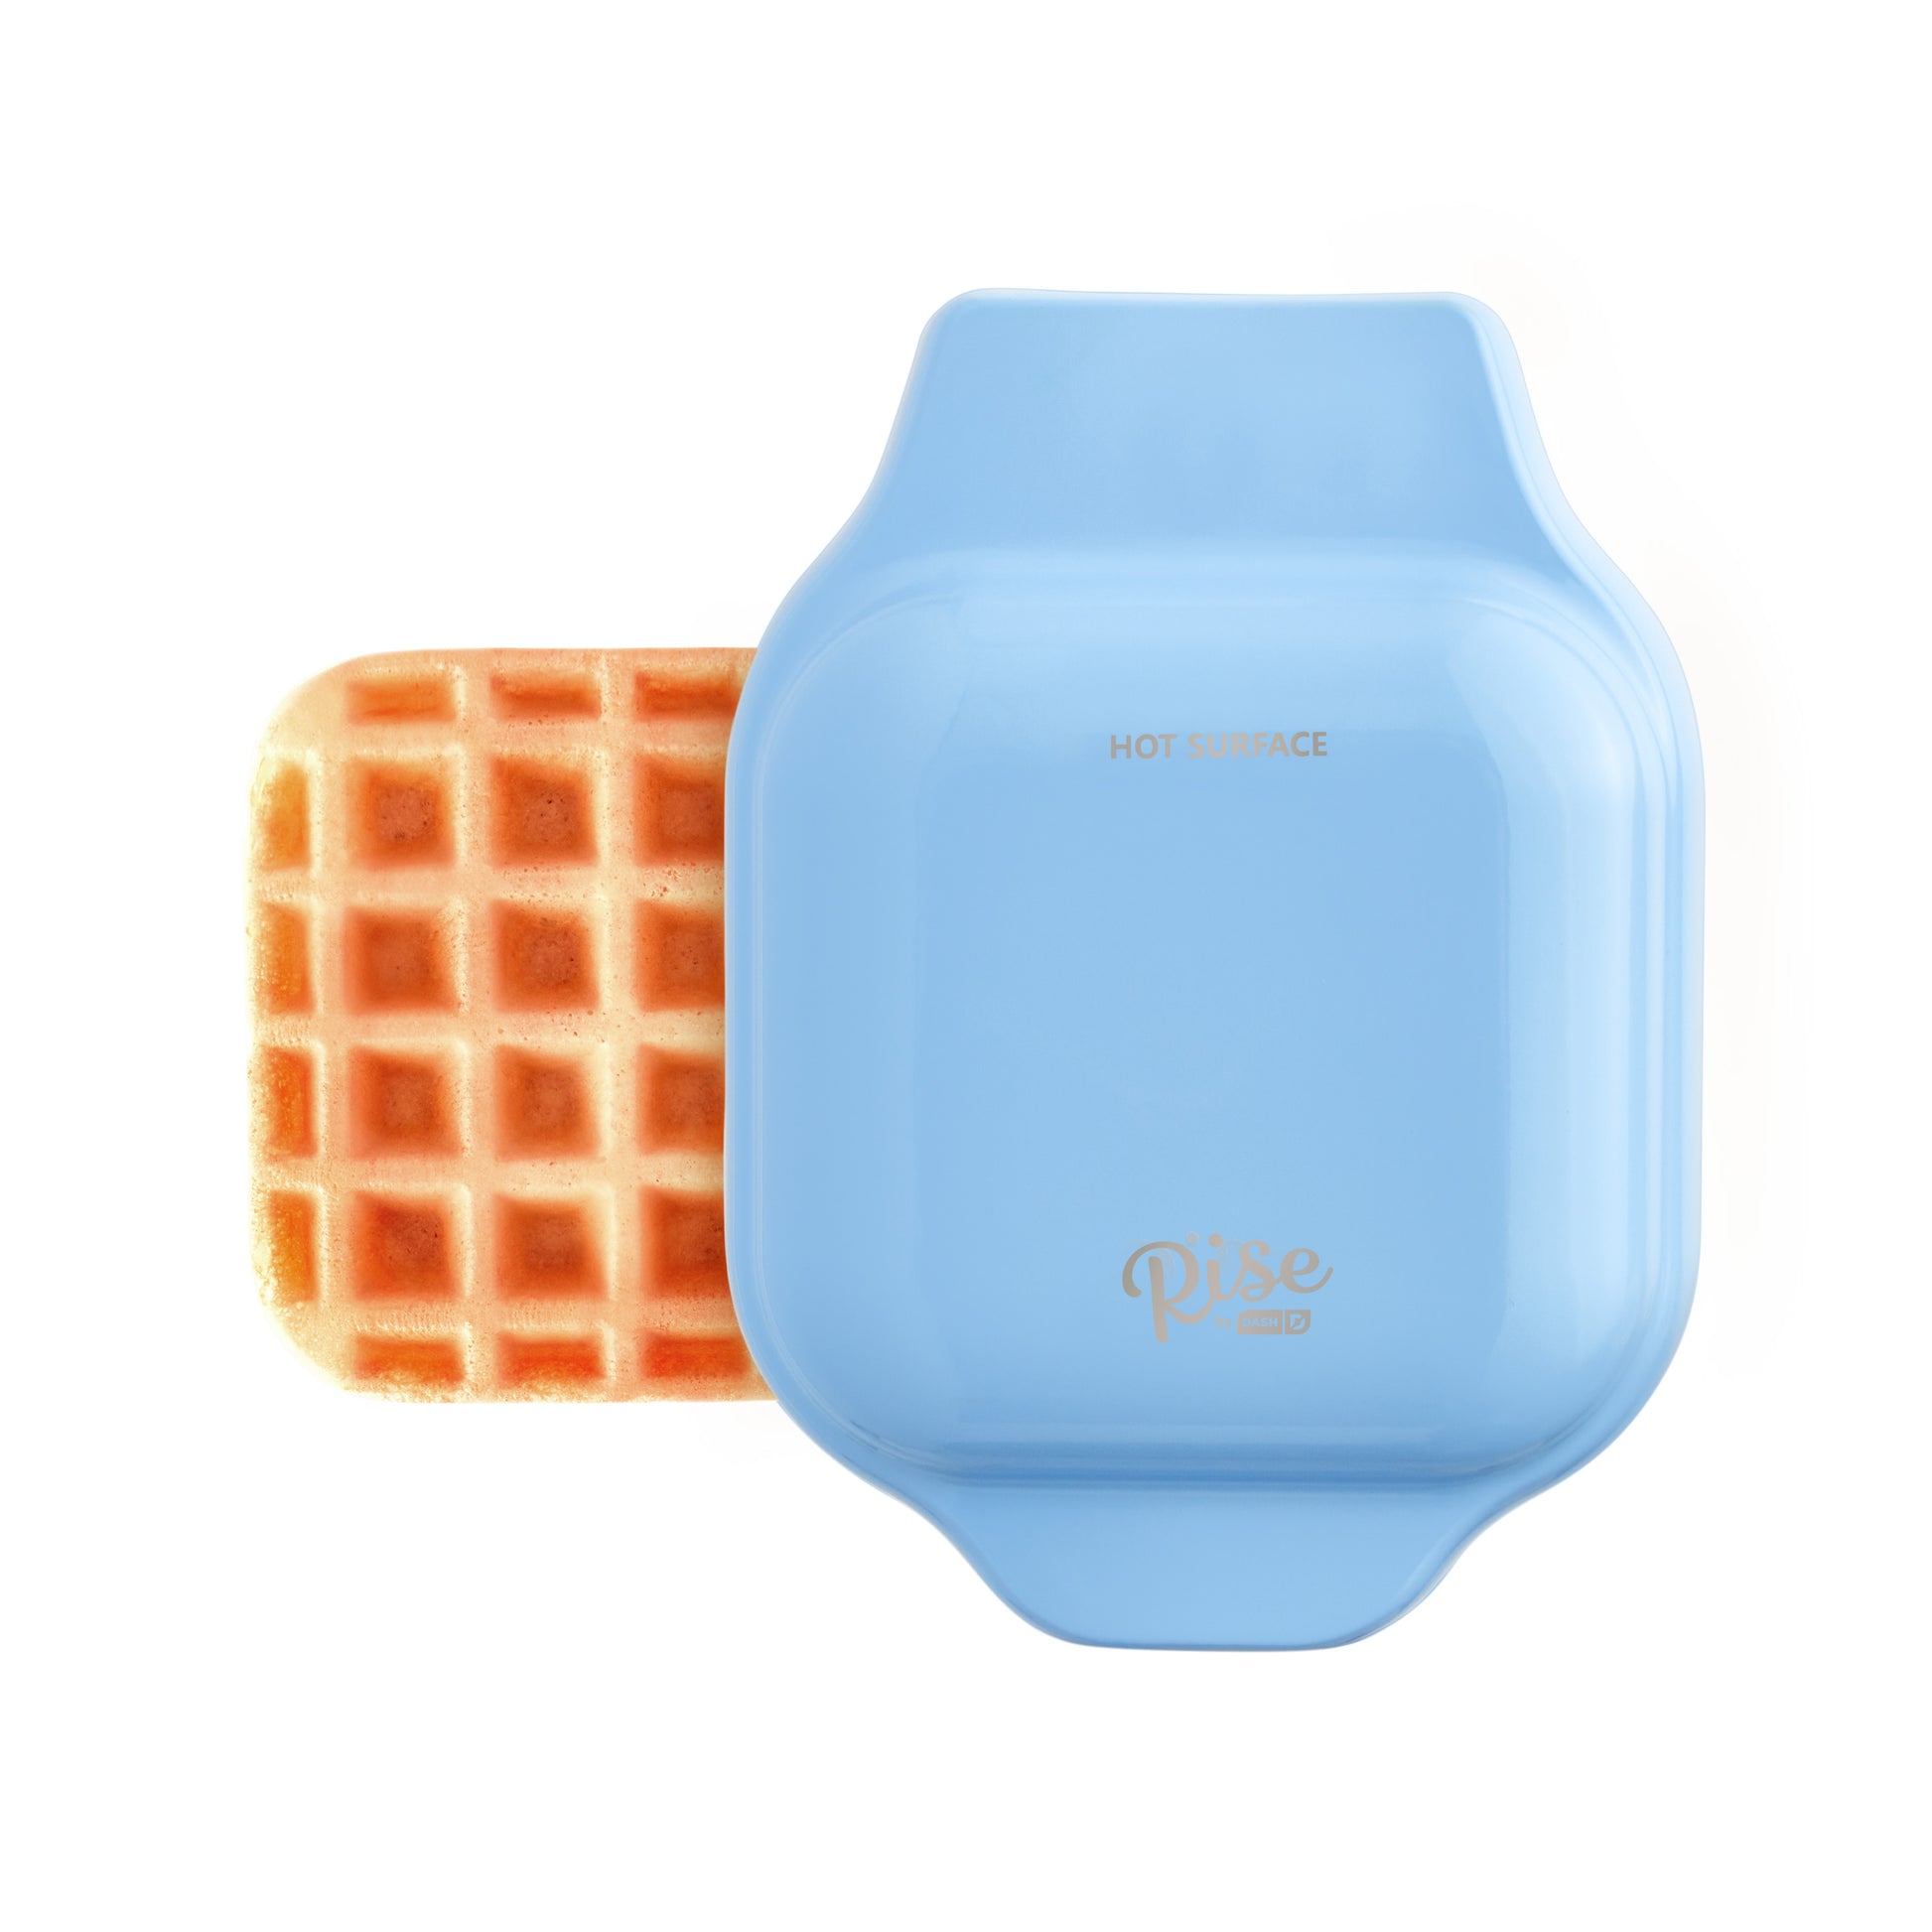 Rise by Dash Mini Waffle Maker Waffle Maker Rise by Dash Blue Sky  